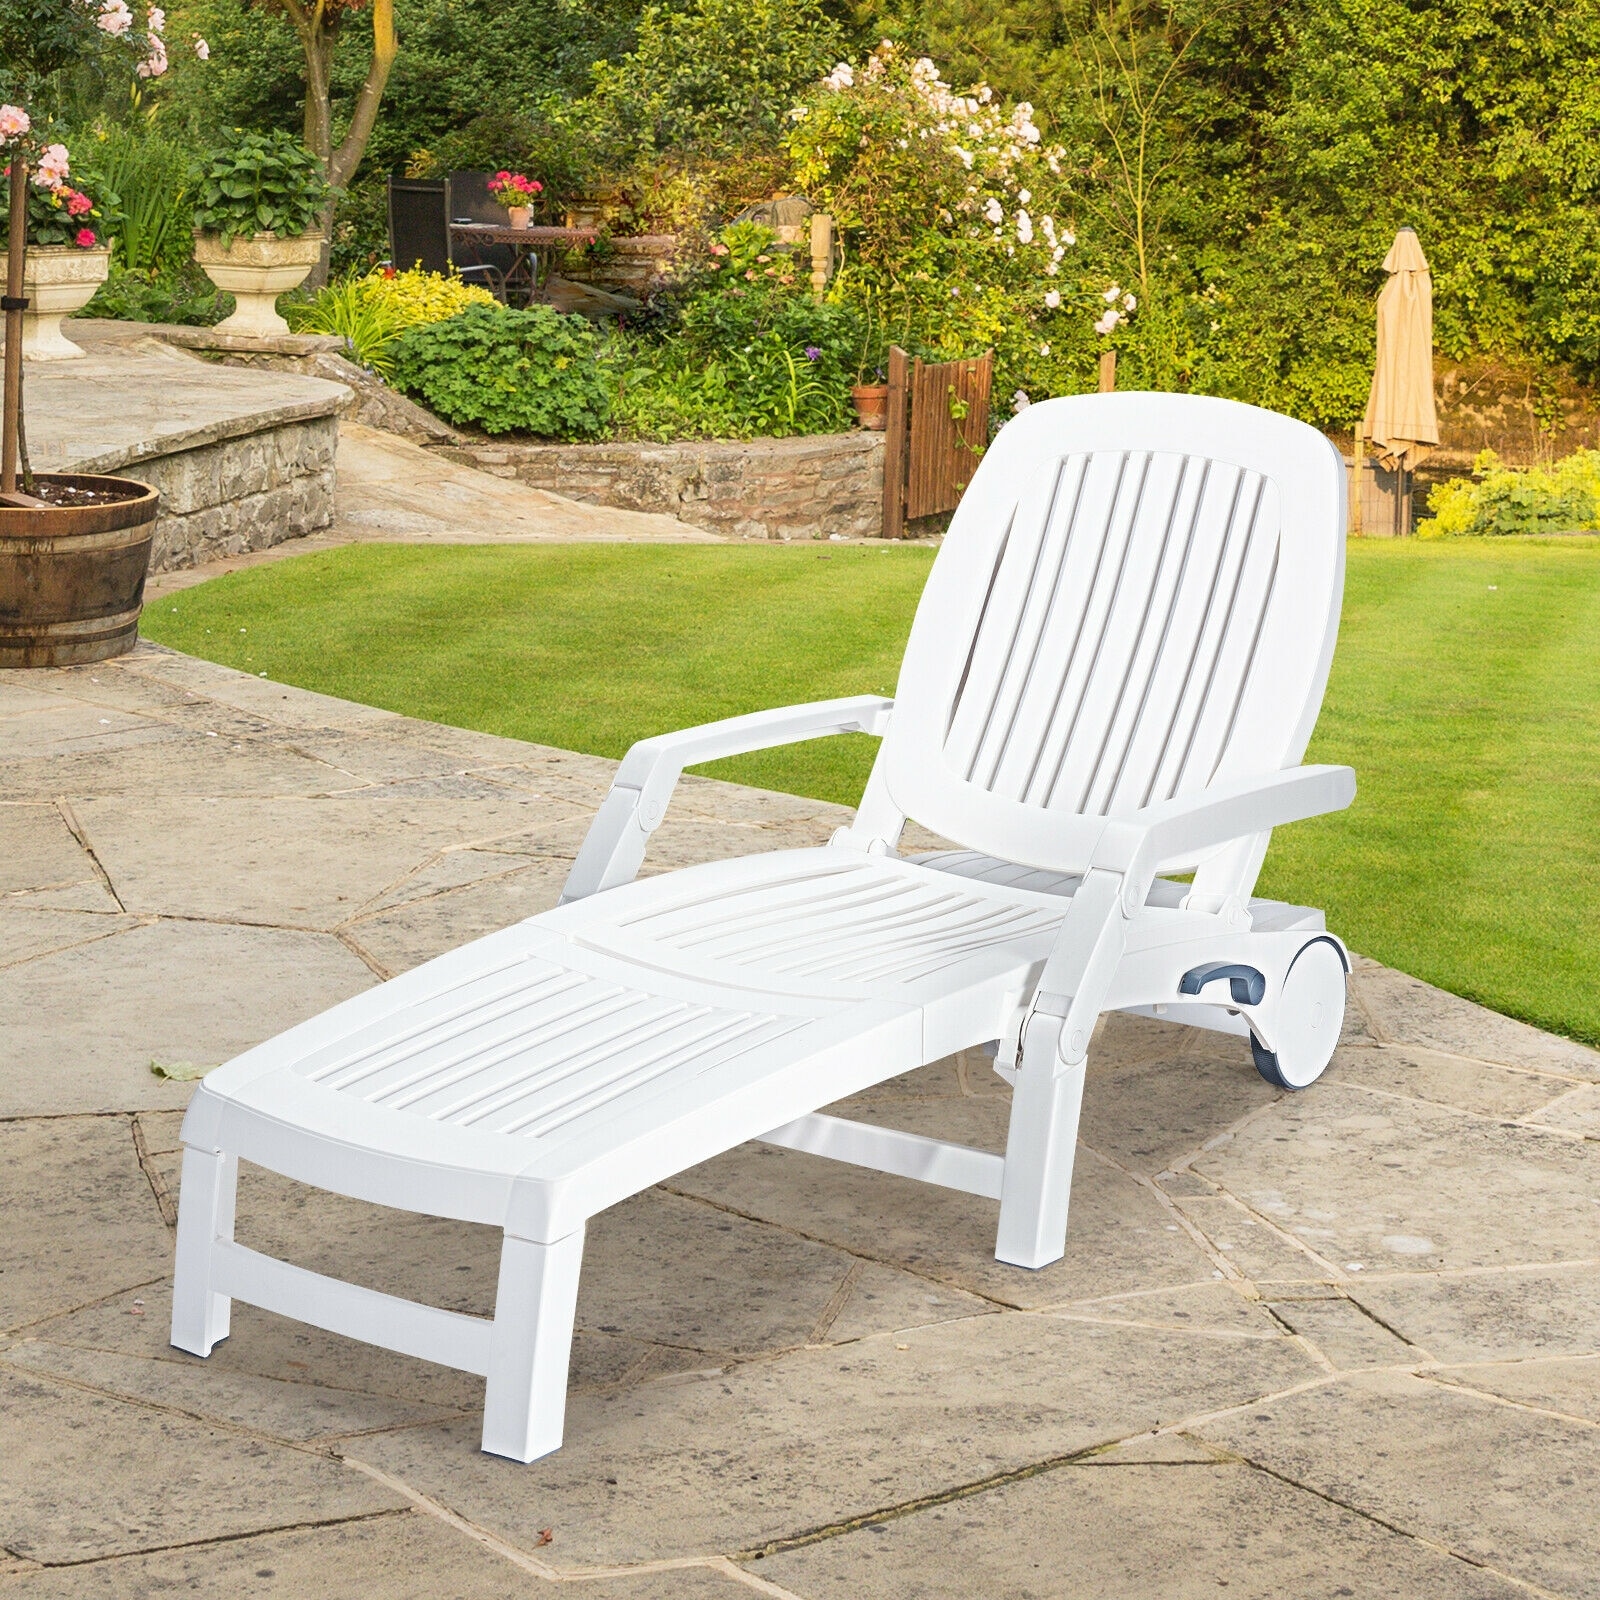 Wellfor Outdoor Foldable Recliner White Plastic Frame Stationary Chaise  Lounge Chair(S) With Solid Seat In The Patio Chairs Department At Lowes.Com